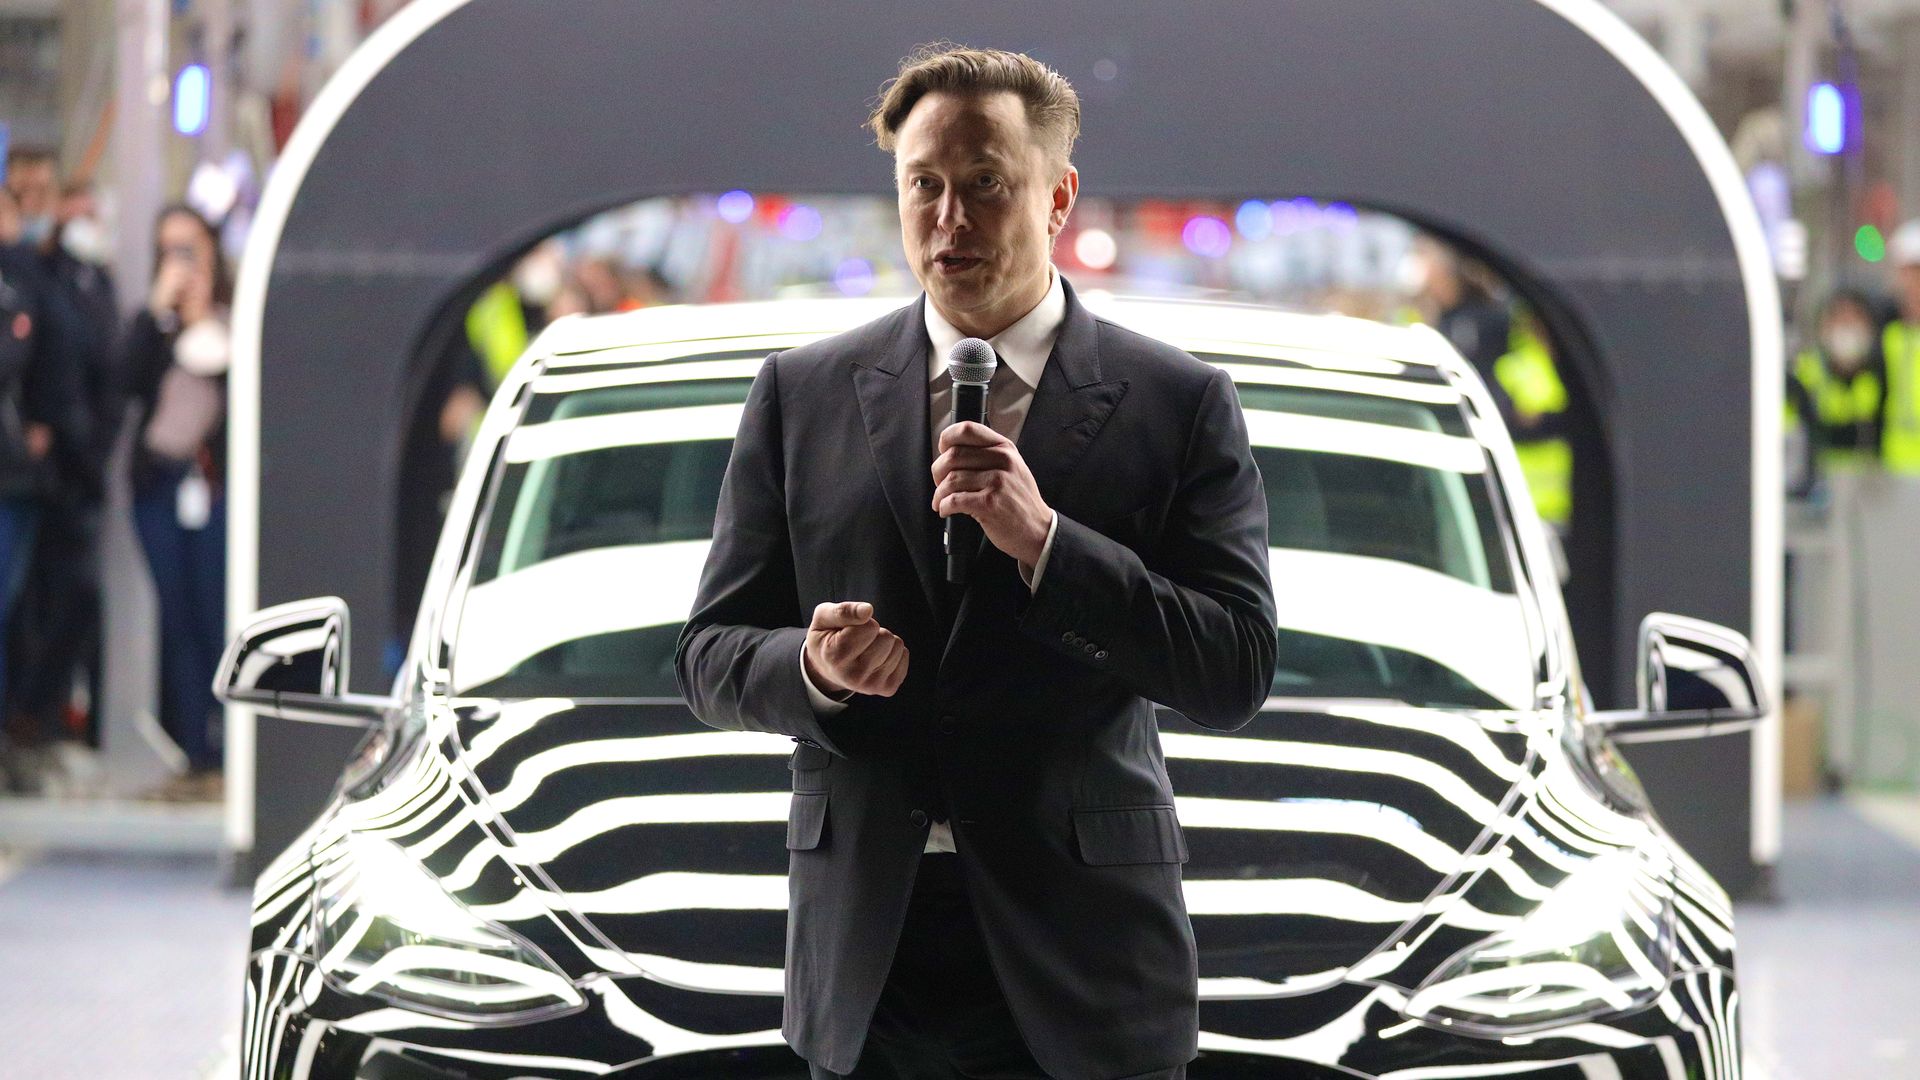 Tesla CEO Elon Musk speaks during the official opening of the new Tesla electric car manufacturing plant on March 22, 2022 near Gruenheide, Germany. 